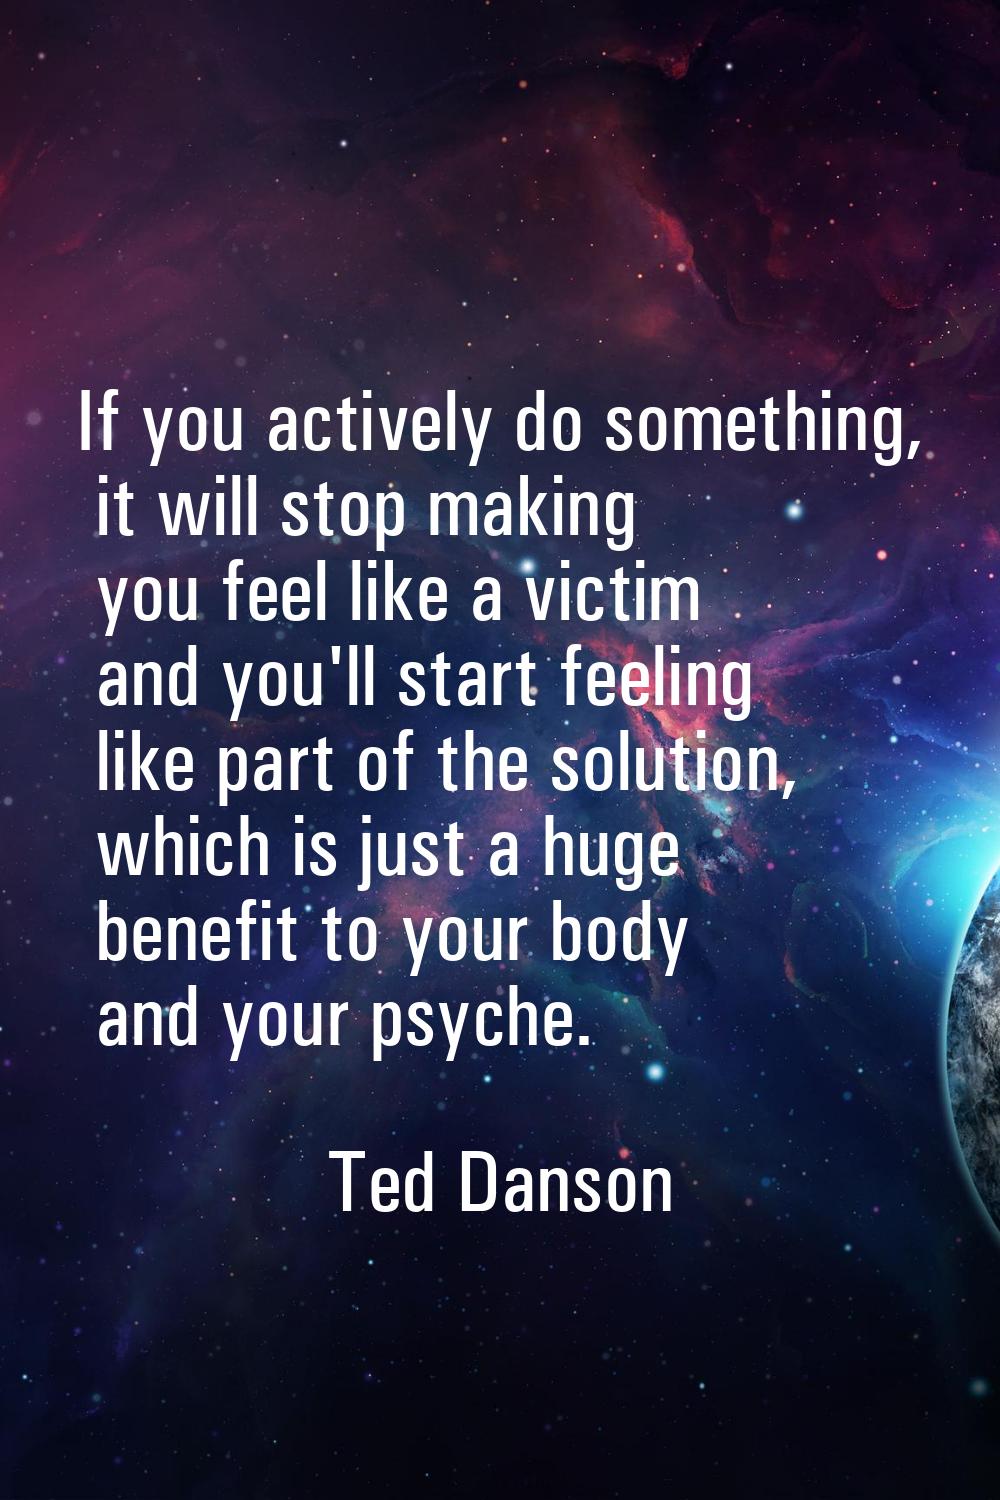 If you actively do something, it will stop making you feel like a victim and you'll start feeling l